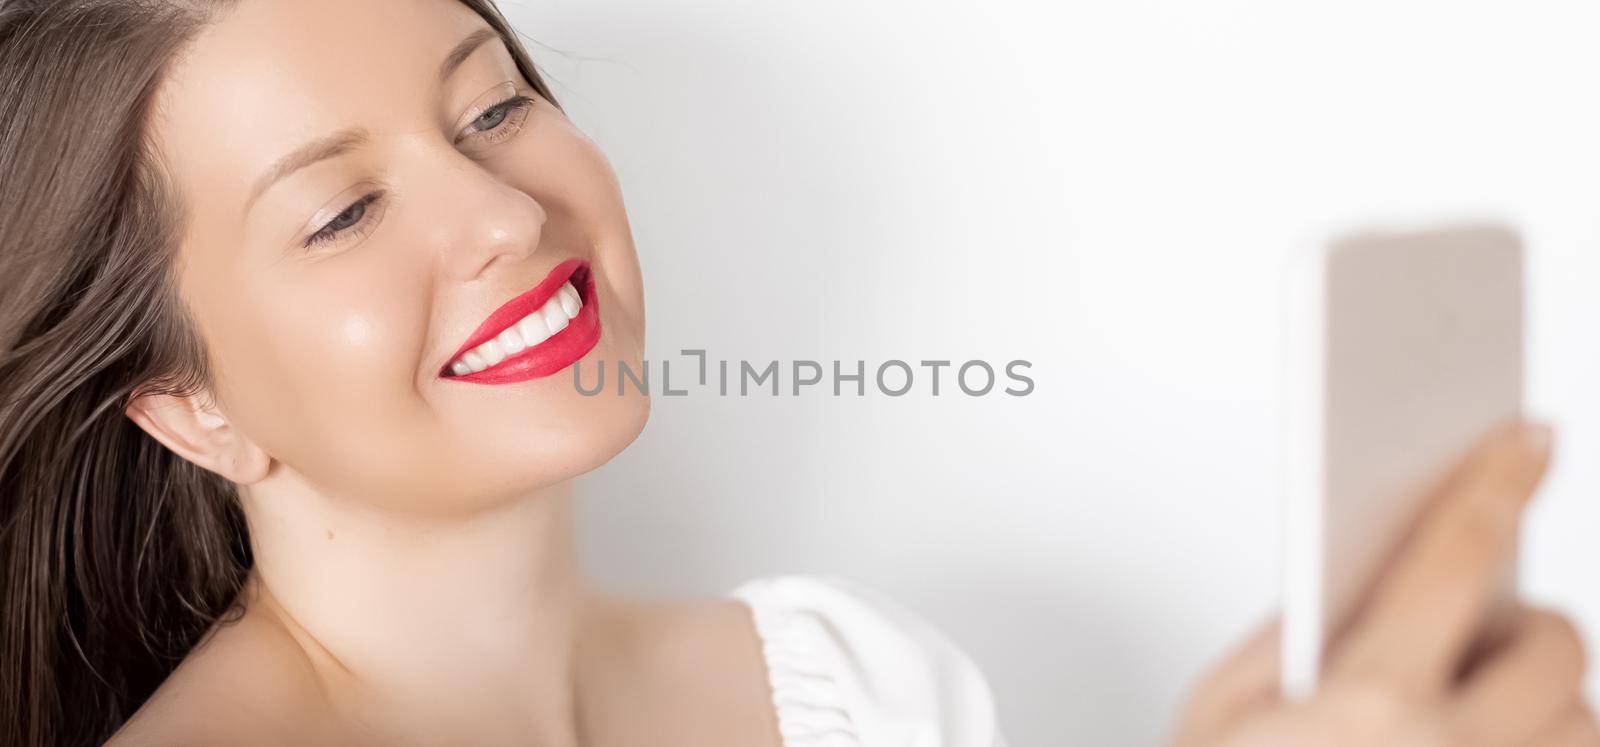 Happy smiling woman with smartphone having video call or taking selfie, portrait on white background. People, technology and communication concept.